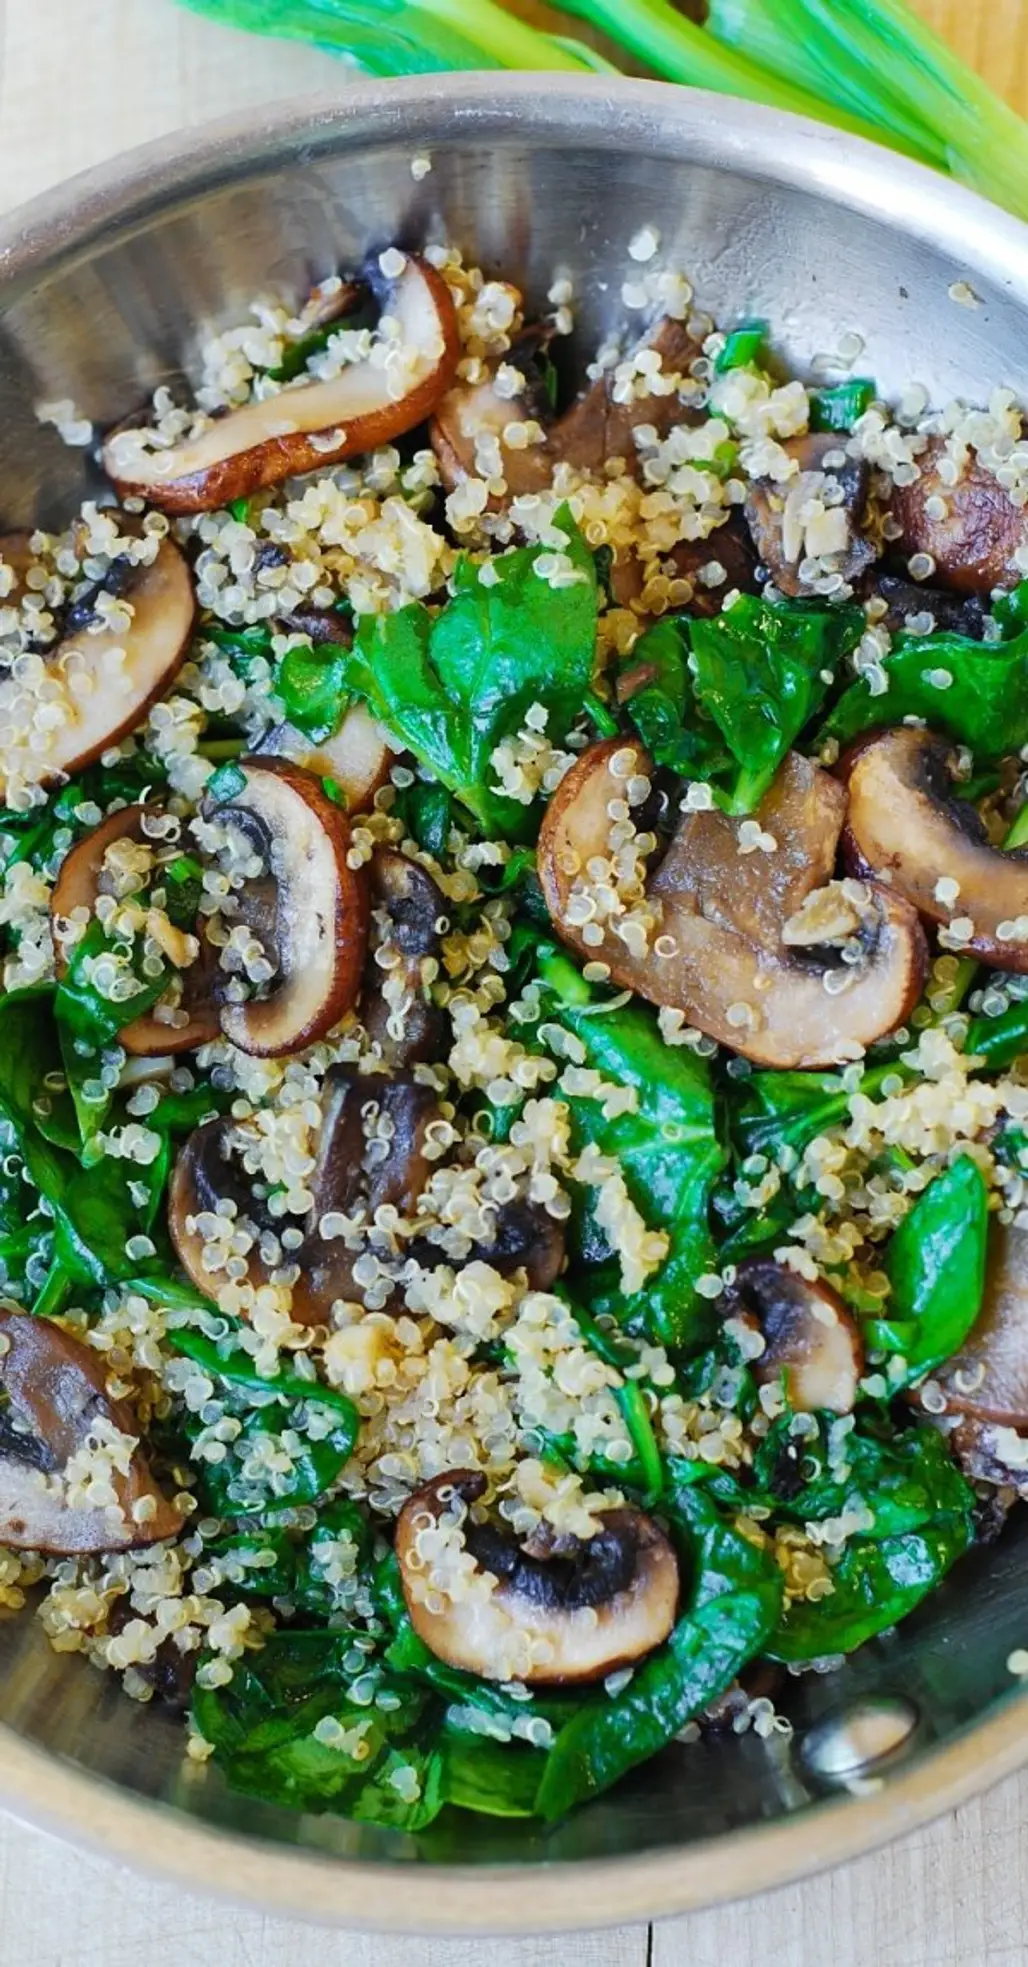 Spinach and Mushroom Quinoa Sauteed in Garlic and Olive Oil